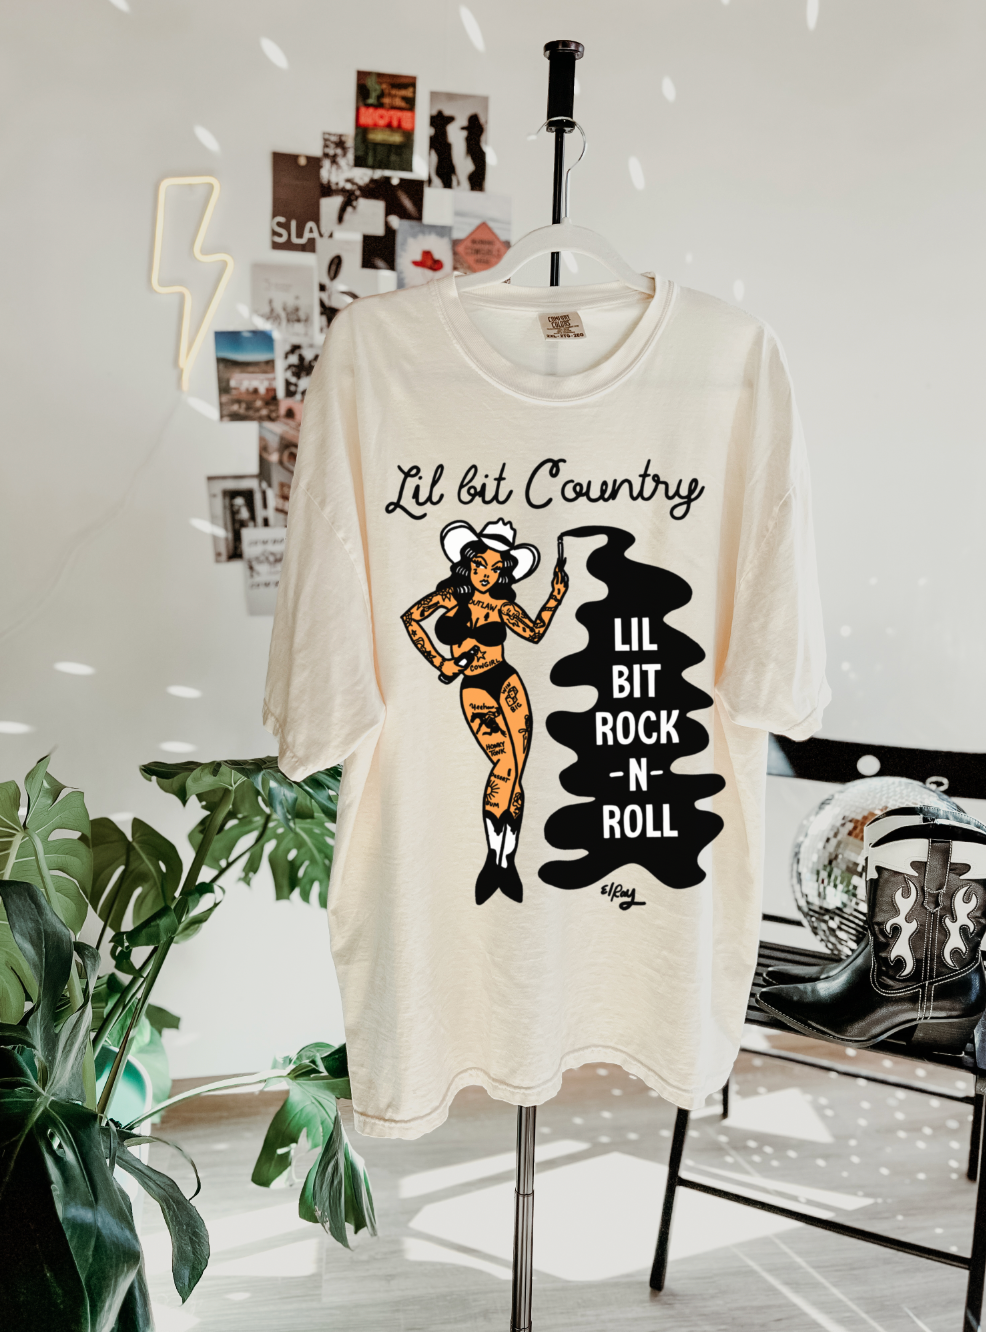 *LICENSED* A Little Bit Country Trendy Grunge Graphic Tee